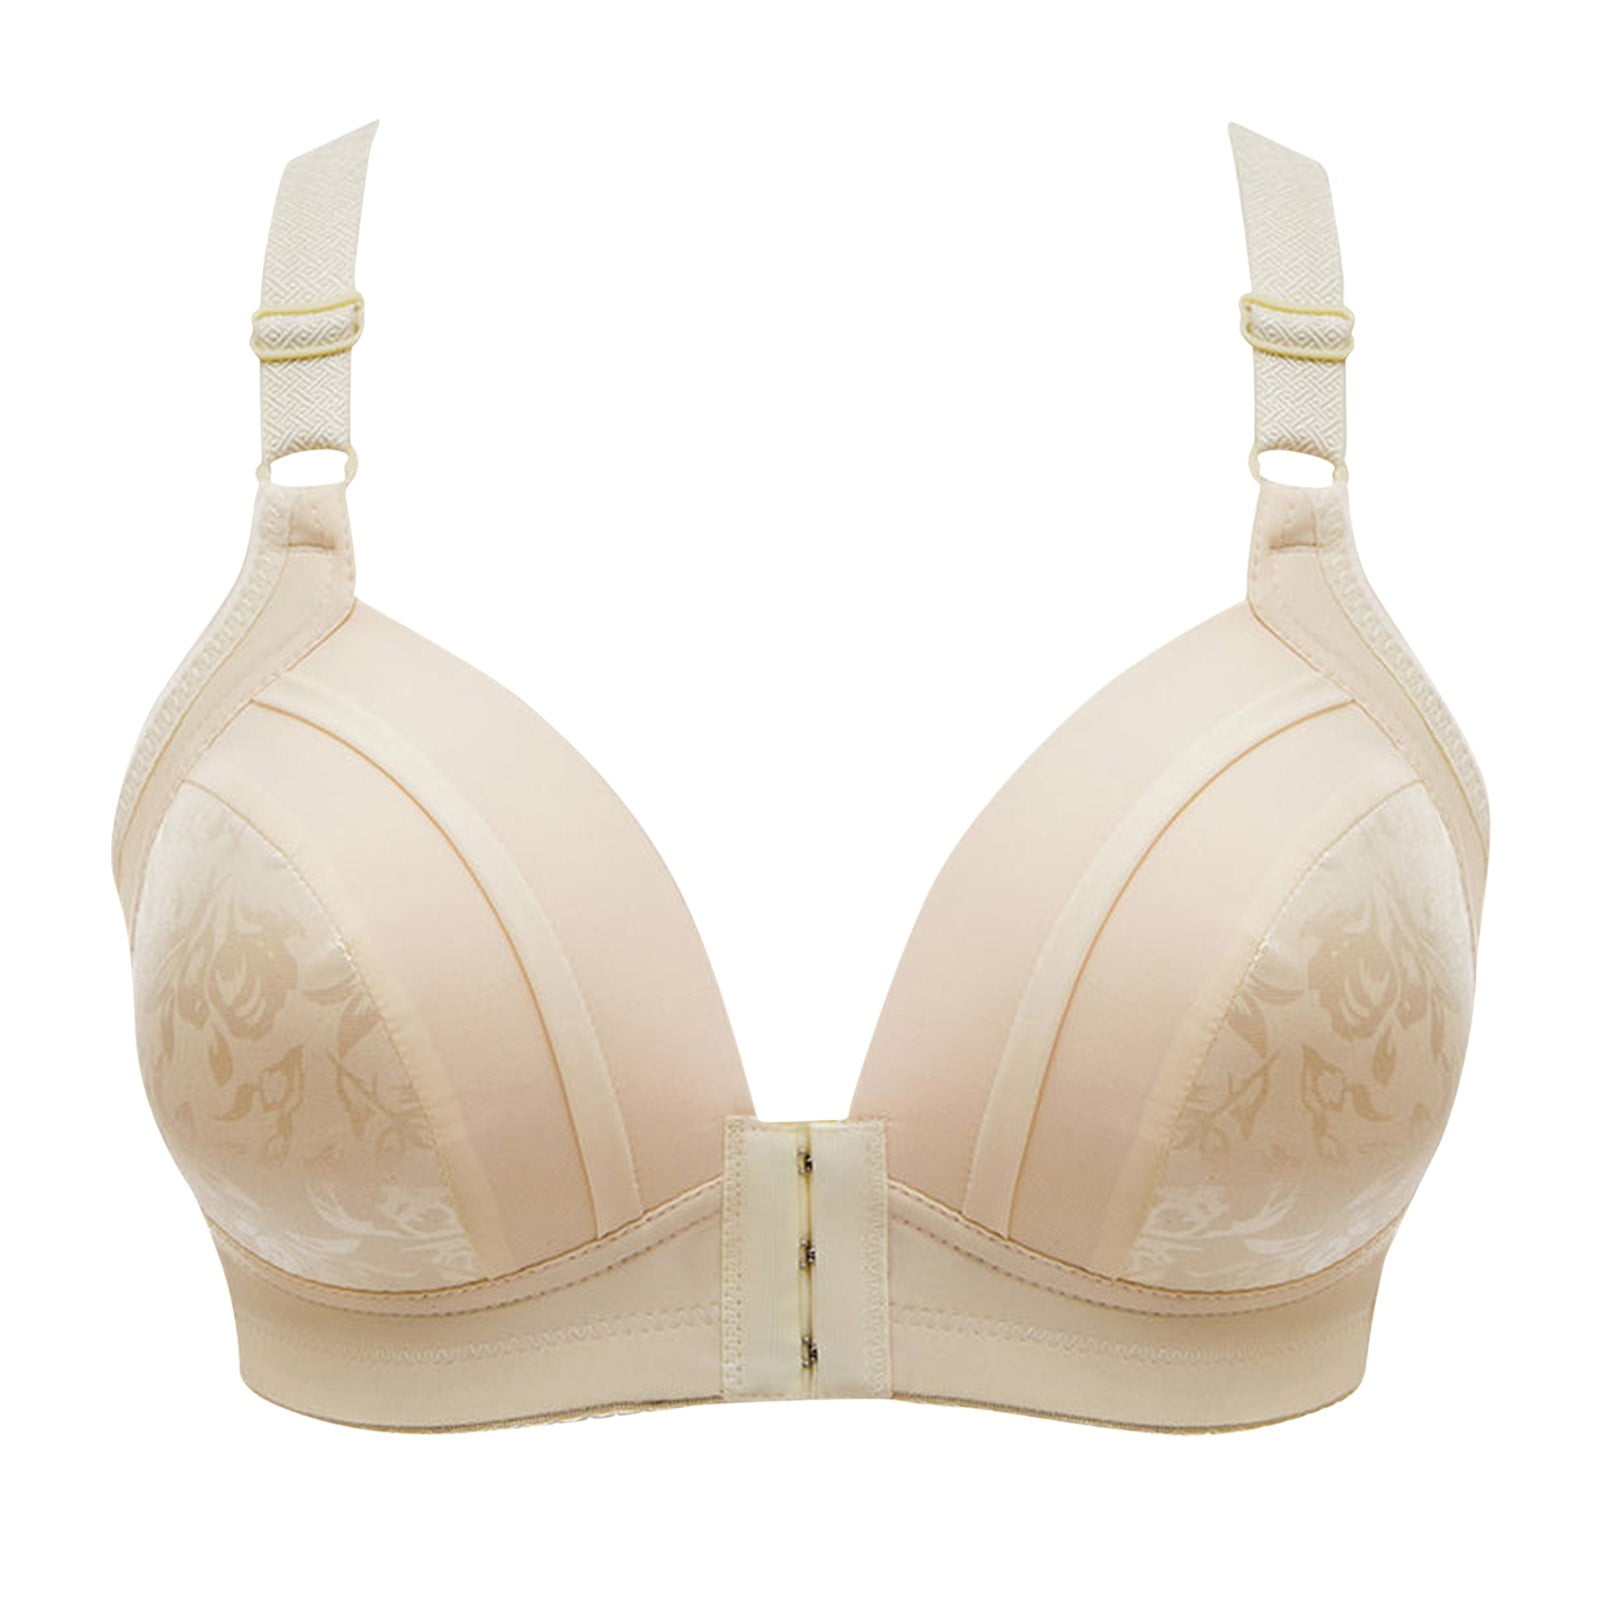 Double Padded Bra For Women Solid Seamless Women's Bra's Small